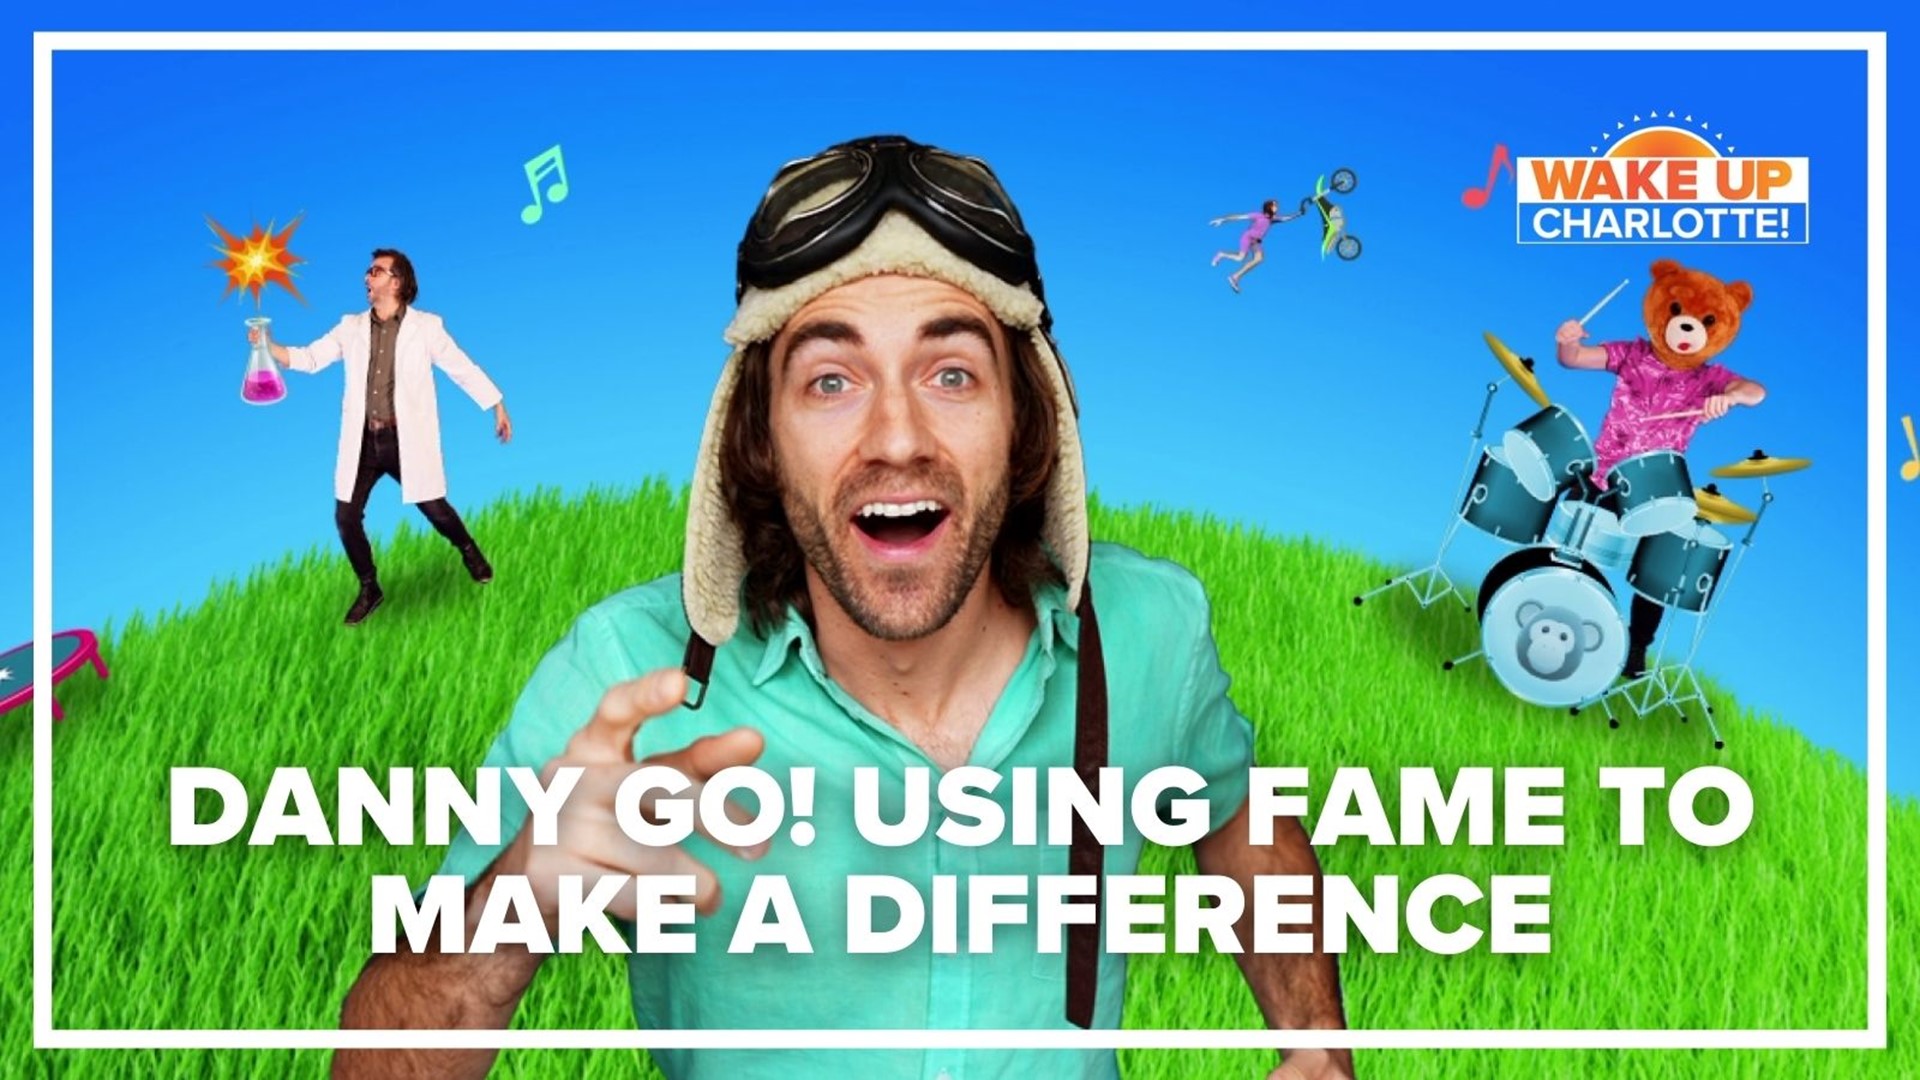 Danny Coleman, known as Danny Go!, started making kids videos after a friend saw his work at Lowe's. Now he's racking up millions of hits and making a difference.